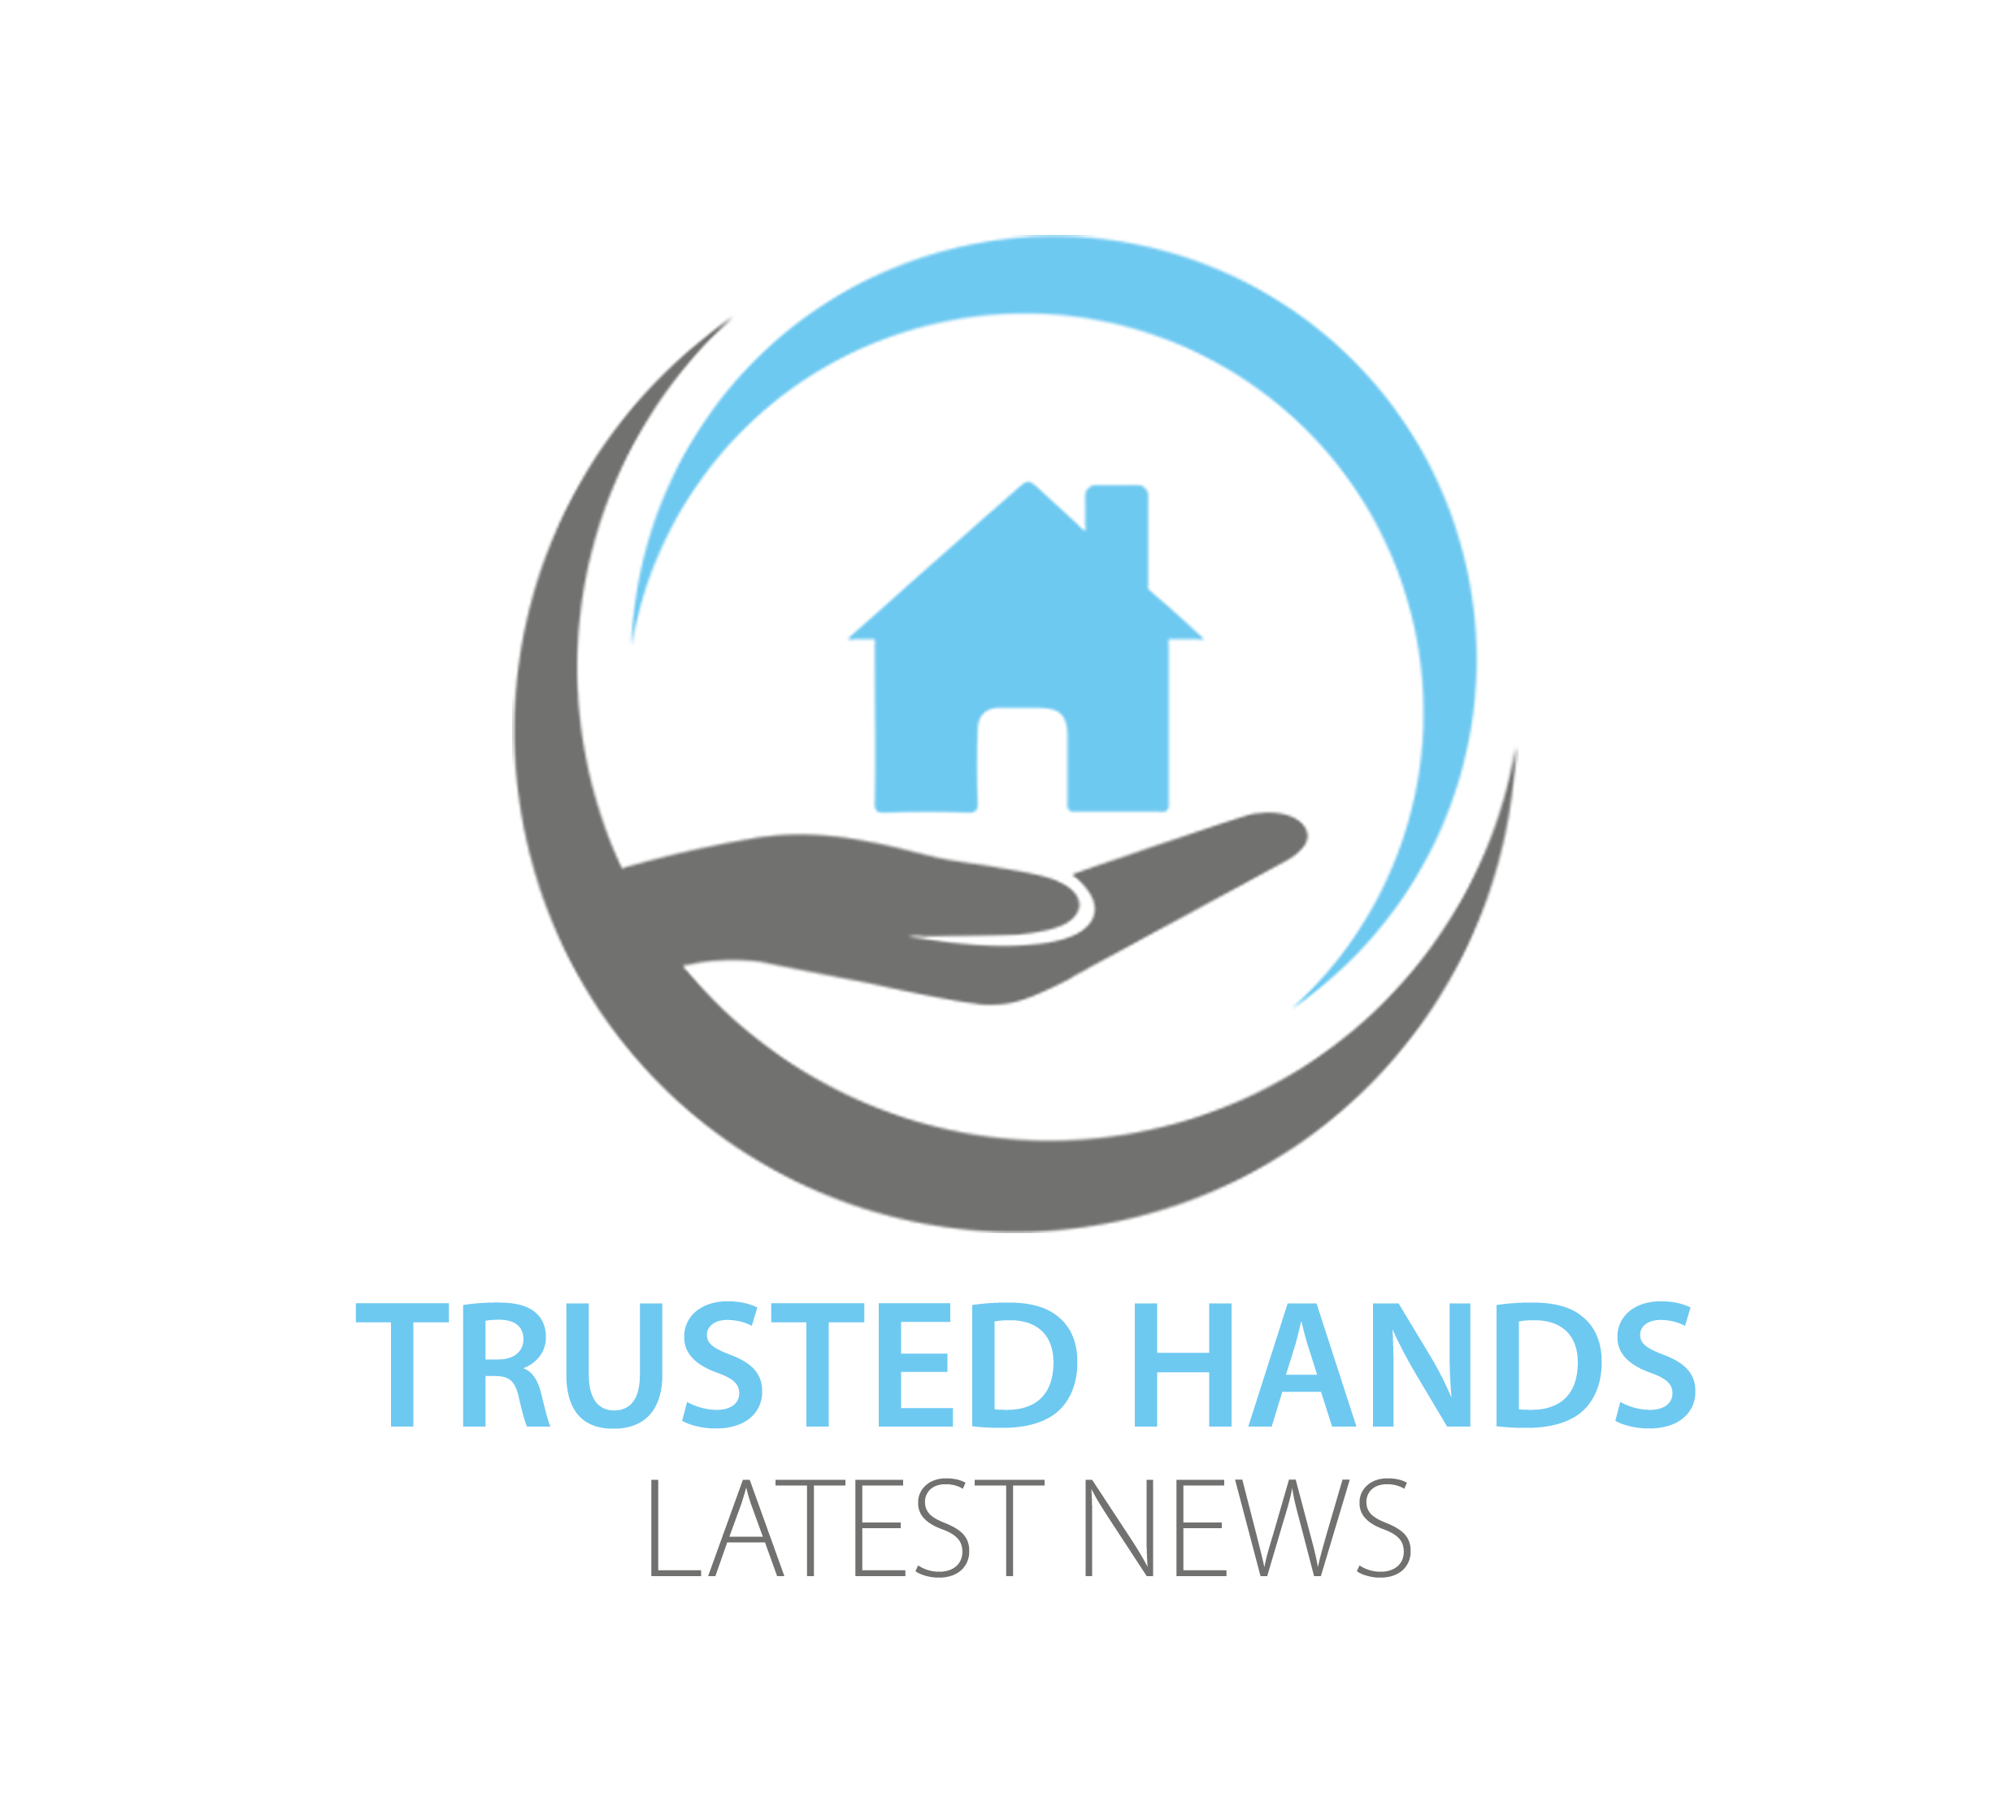 Trusted hands LATEST NEWS